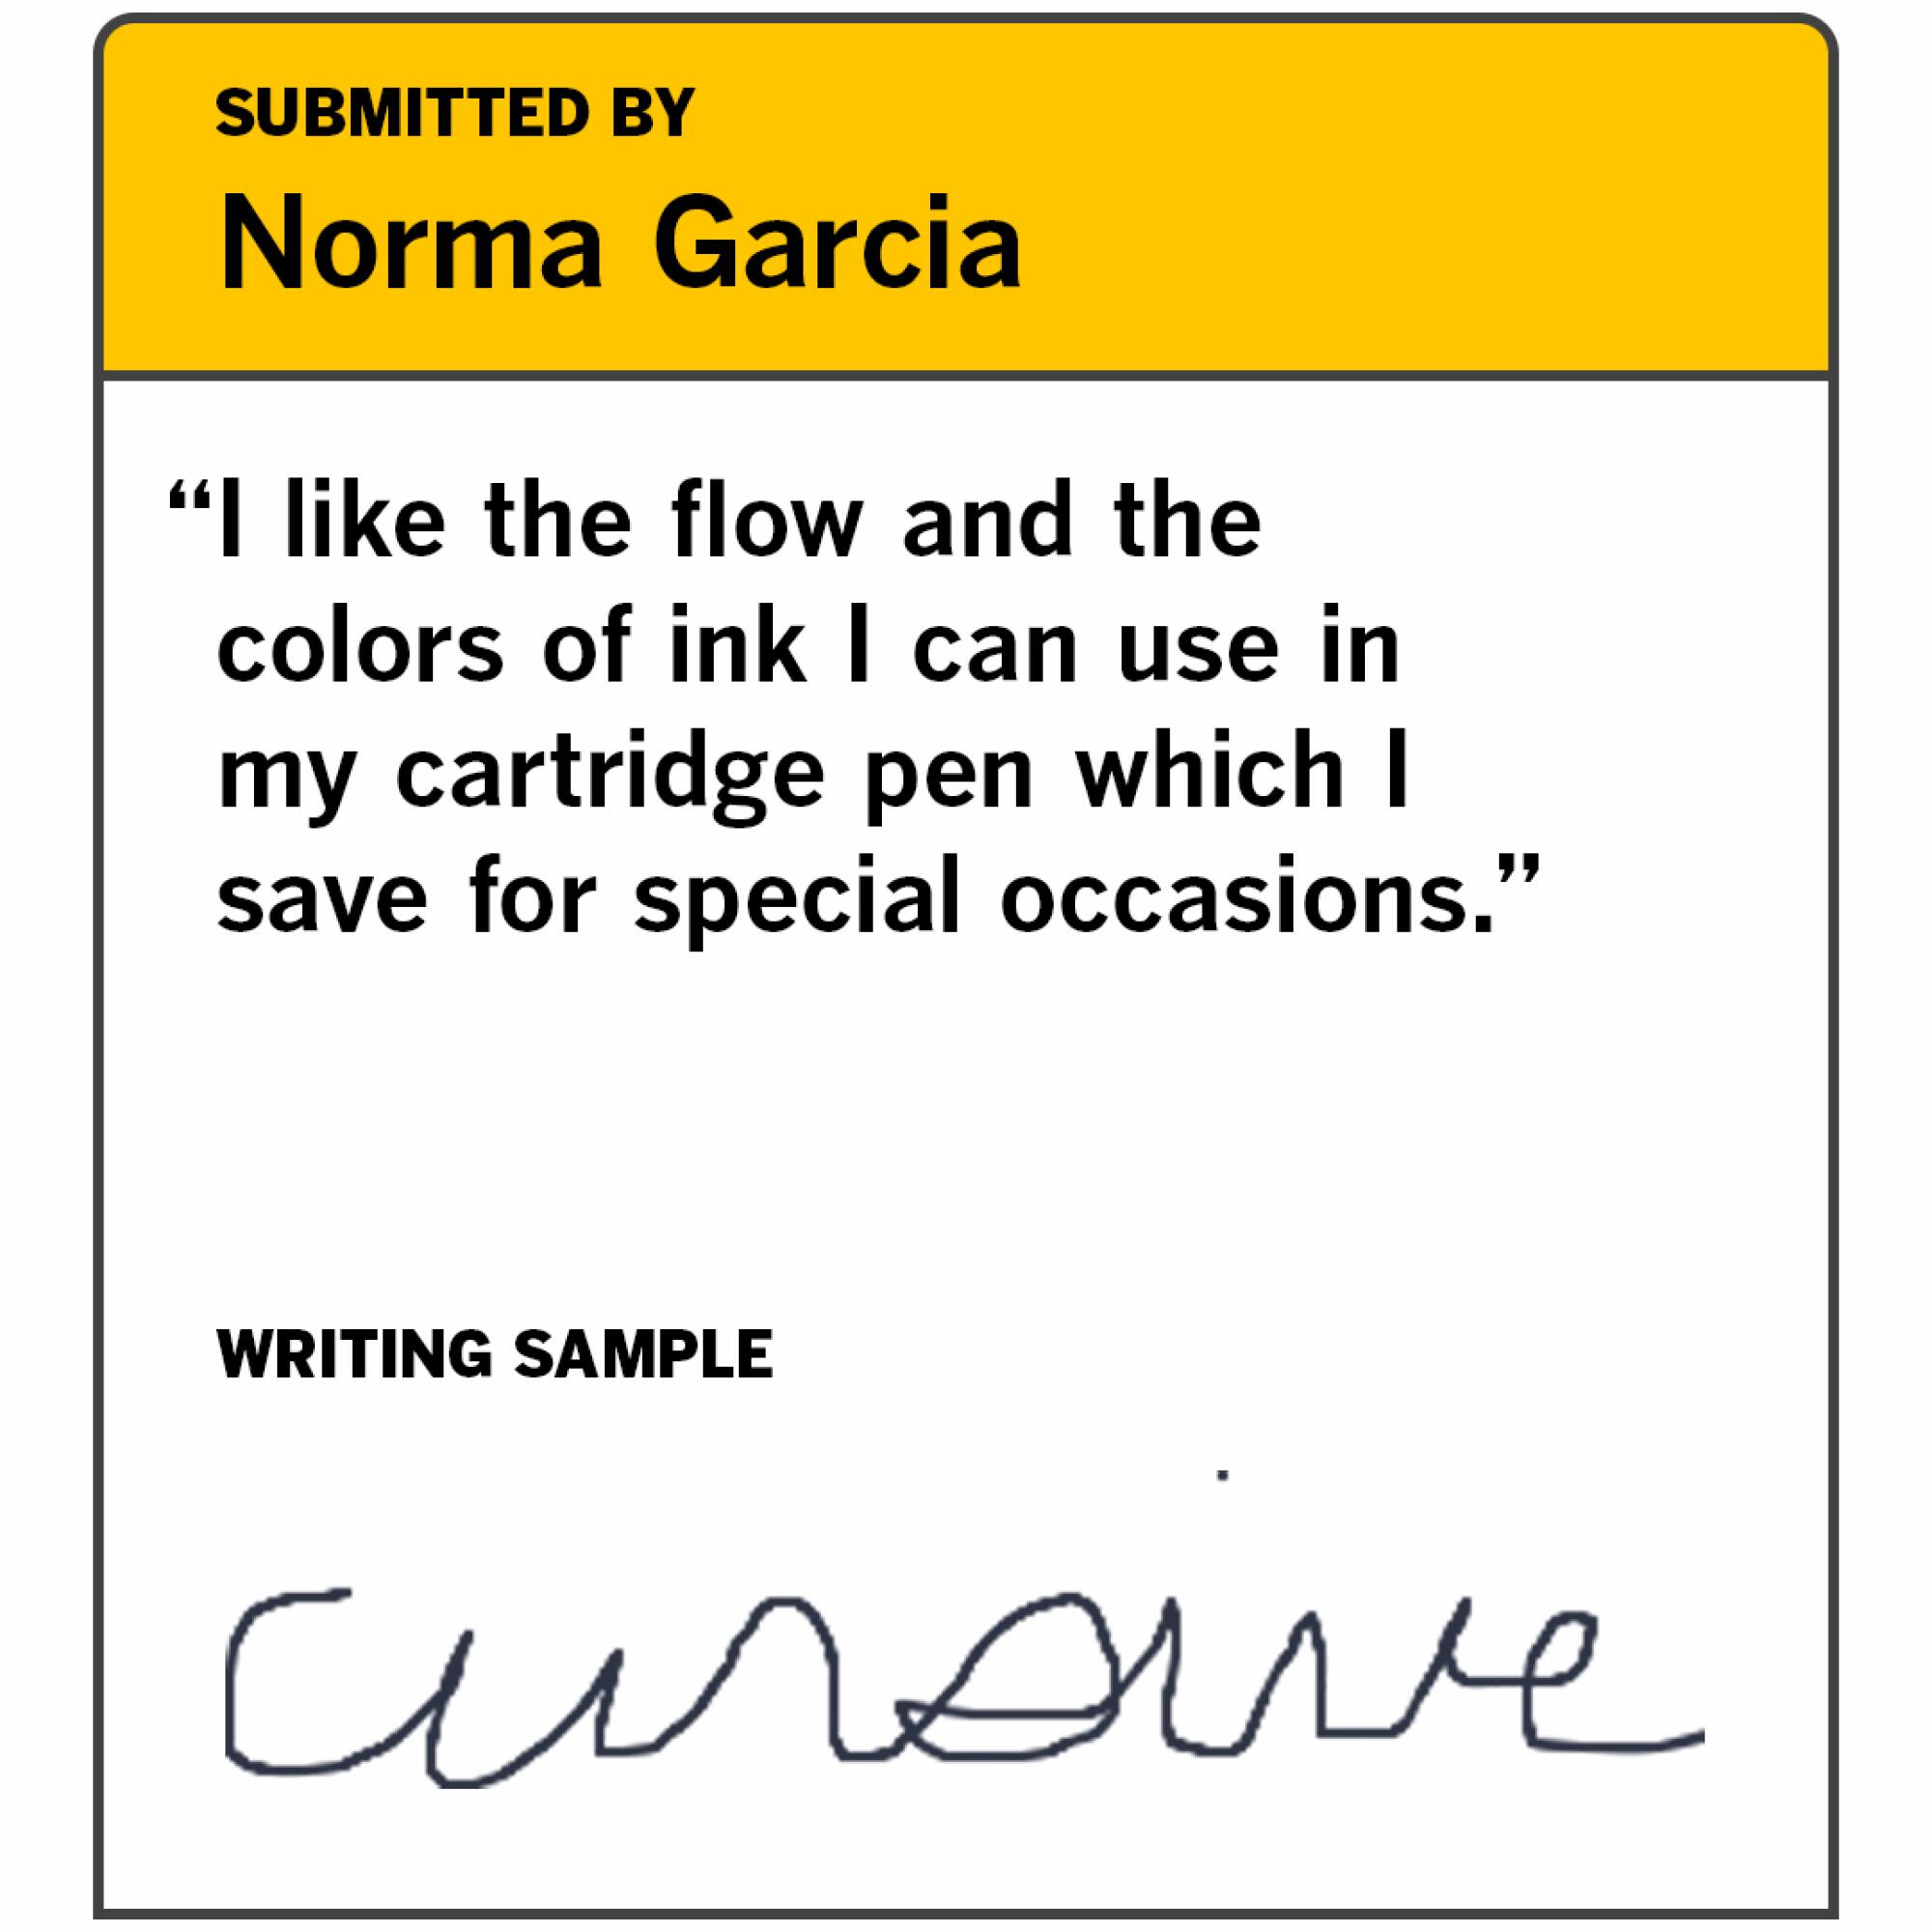 Cursive writing example from Norma Garcia